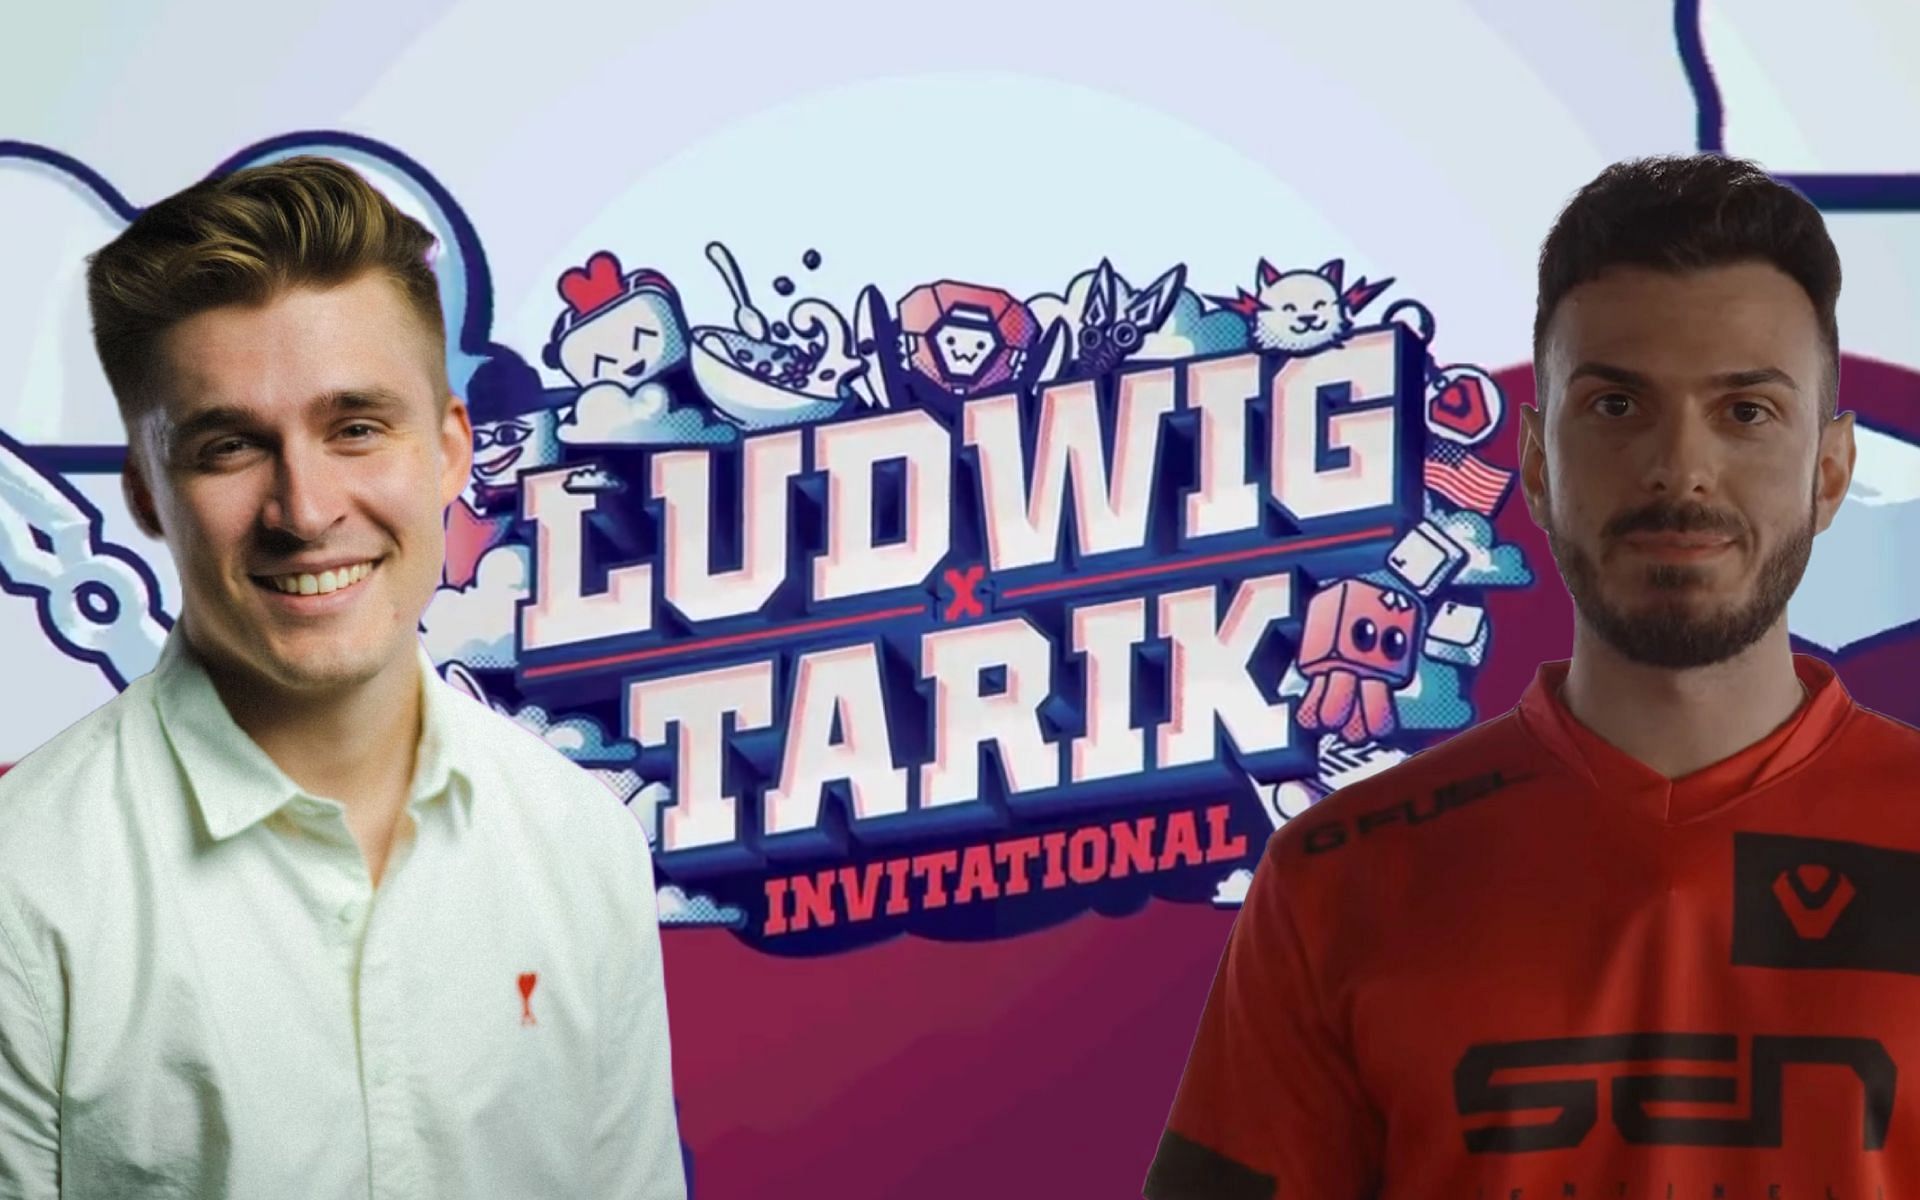 Ludwig announces Chessboxing event after Smash Invitational fail 